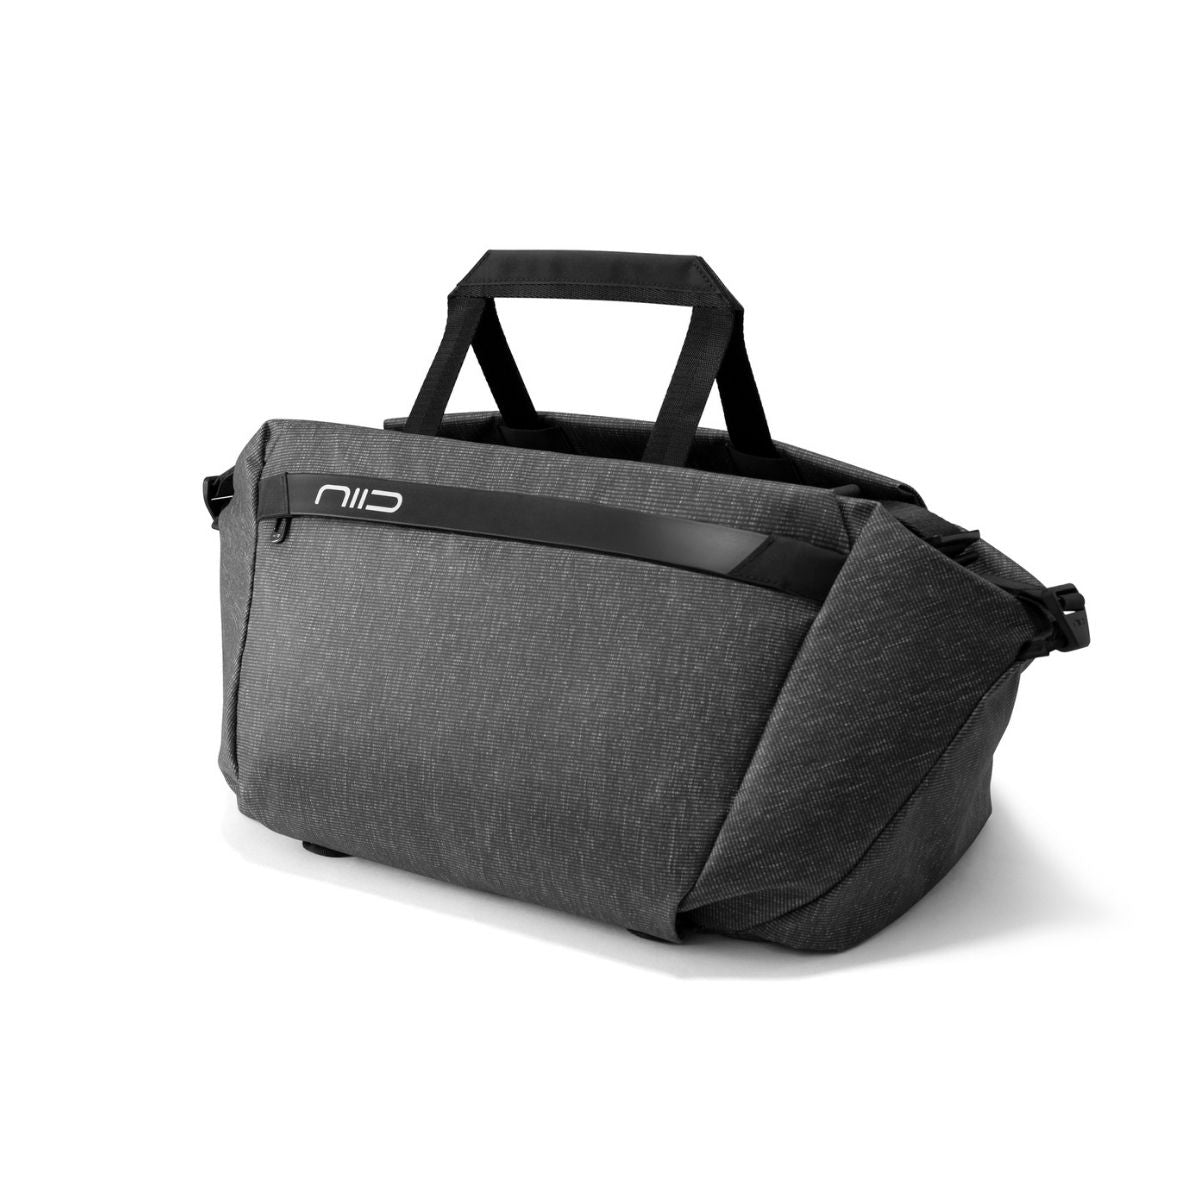 niid　CACHE-Hybrid Tech Sling and Duffle